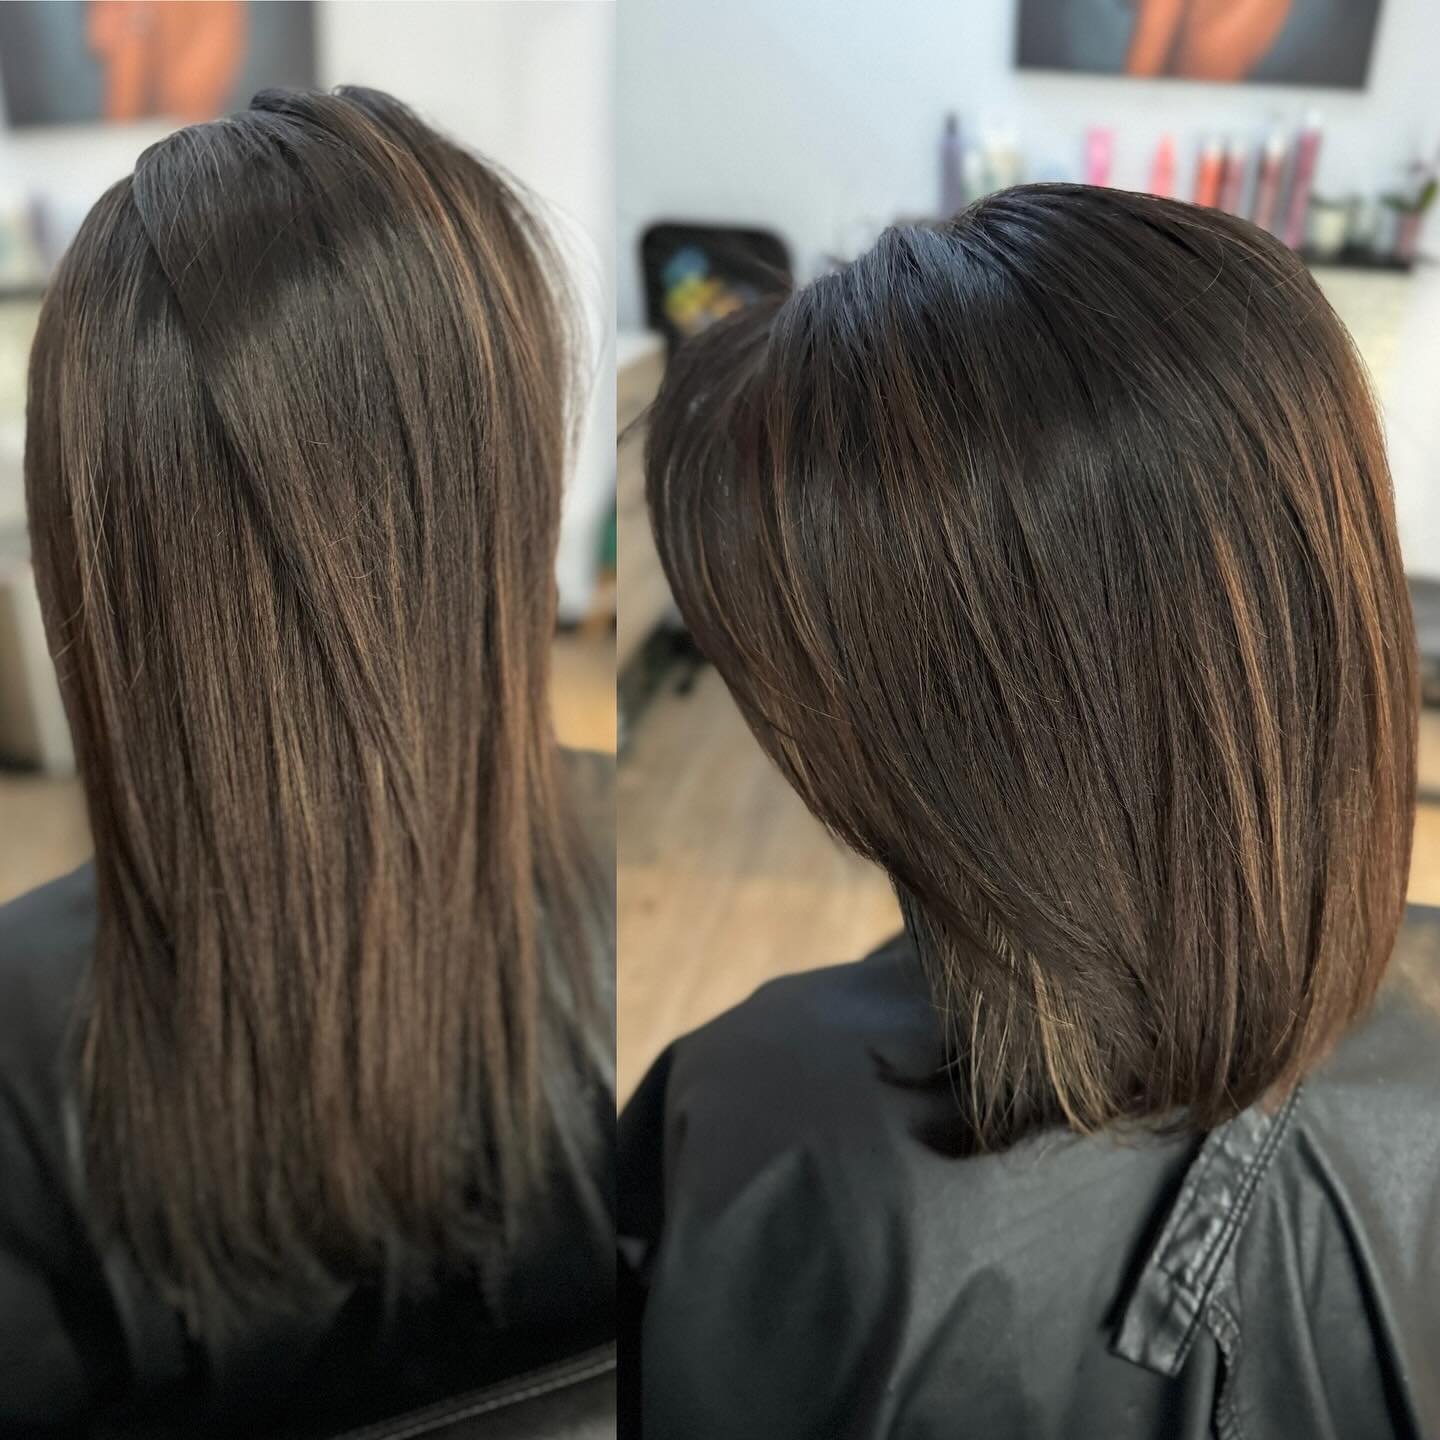 🖤 T R A N S F O R M A T I O N  T U E S D A Y 🖤

The power of a good chop ✂️ !

&bull;

Did you know getting a regular haircut can significantly impact our mental health and emotions? 

One of the significant benefits of getting a haircut is improve